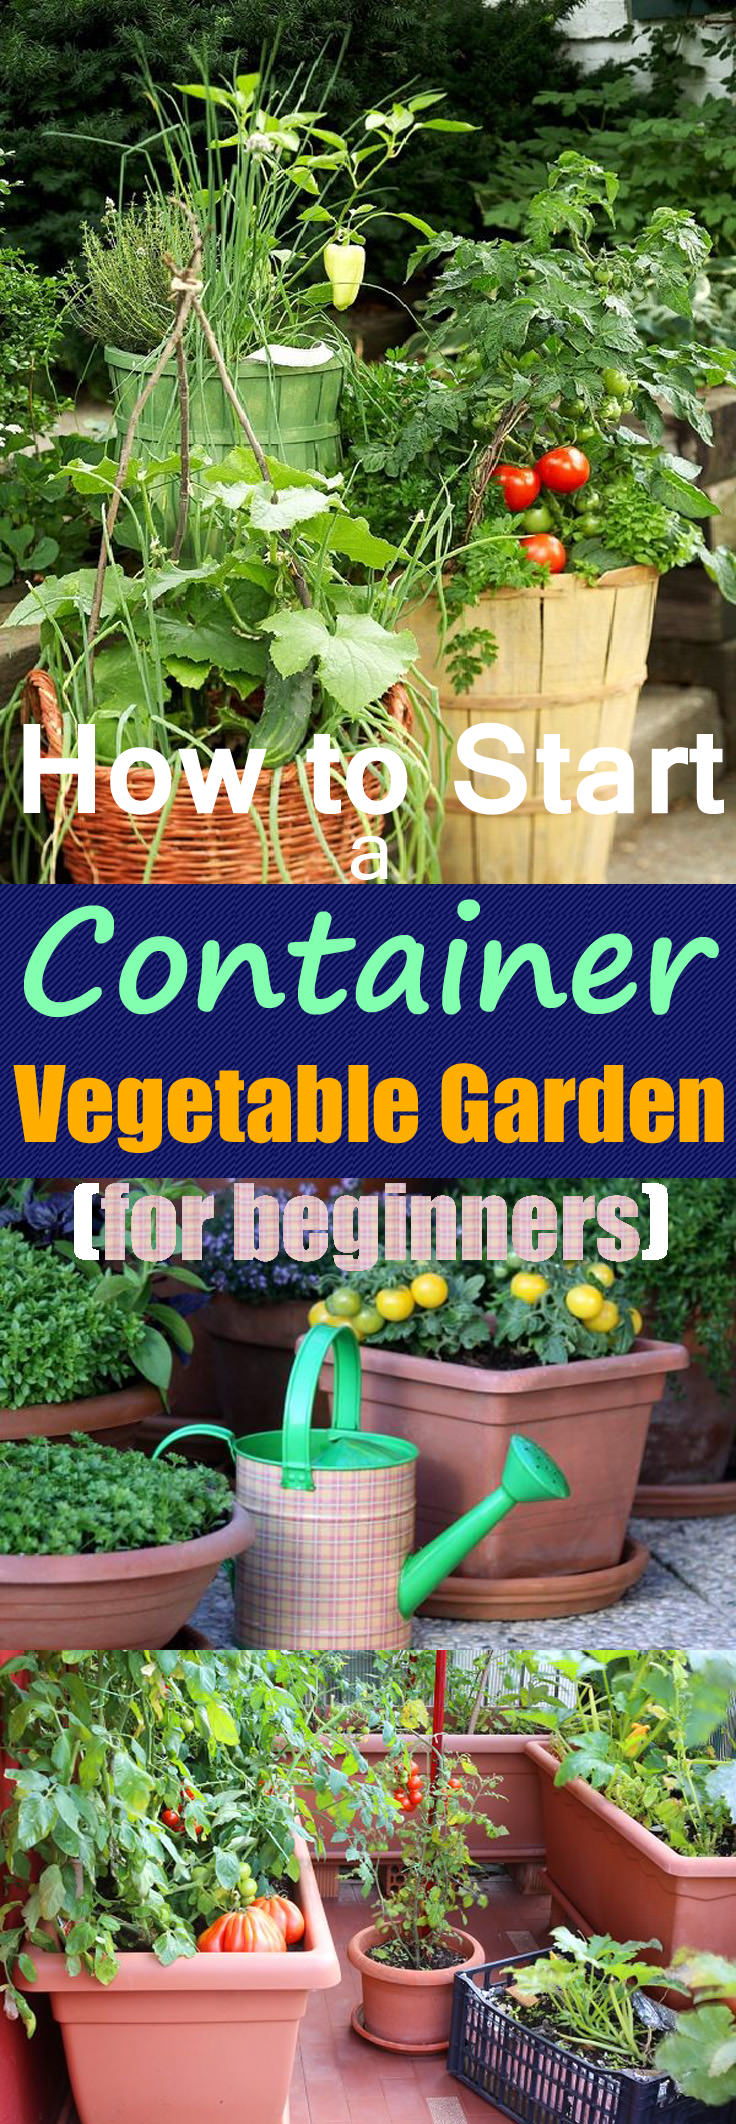 Growing Vegetables In Pots | Starting A Container ...
